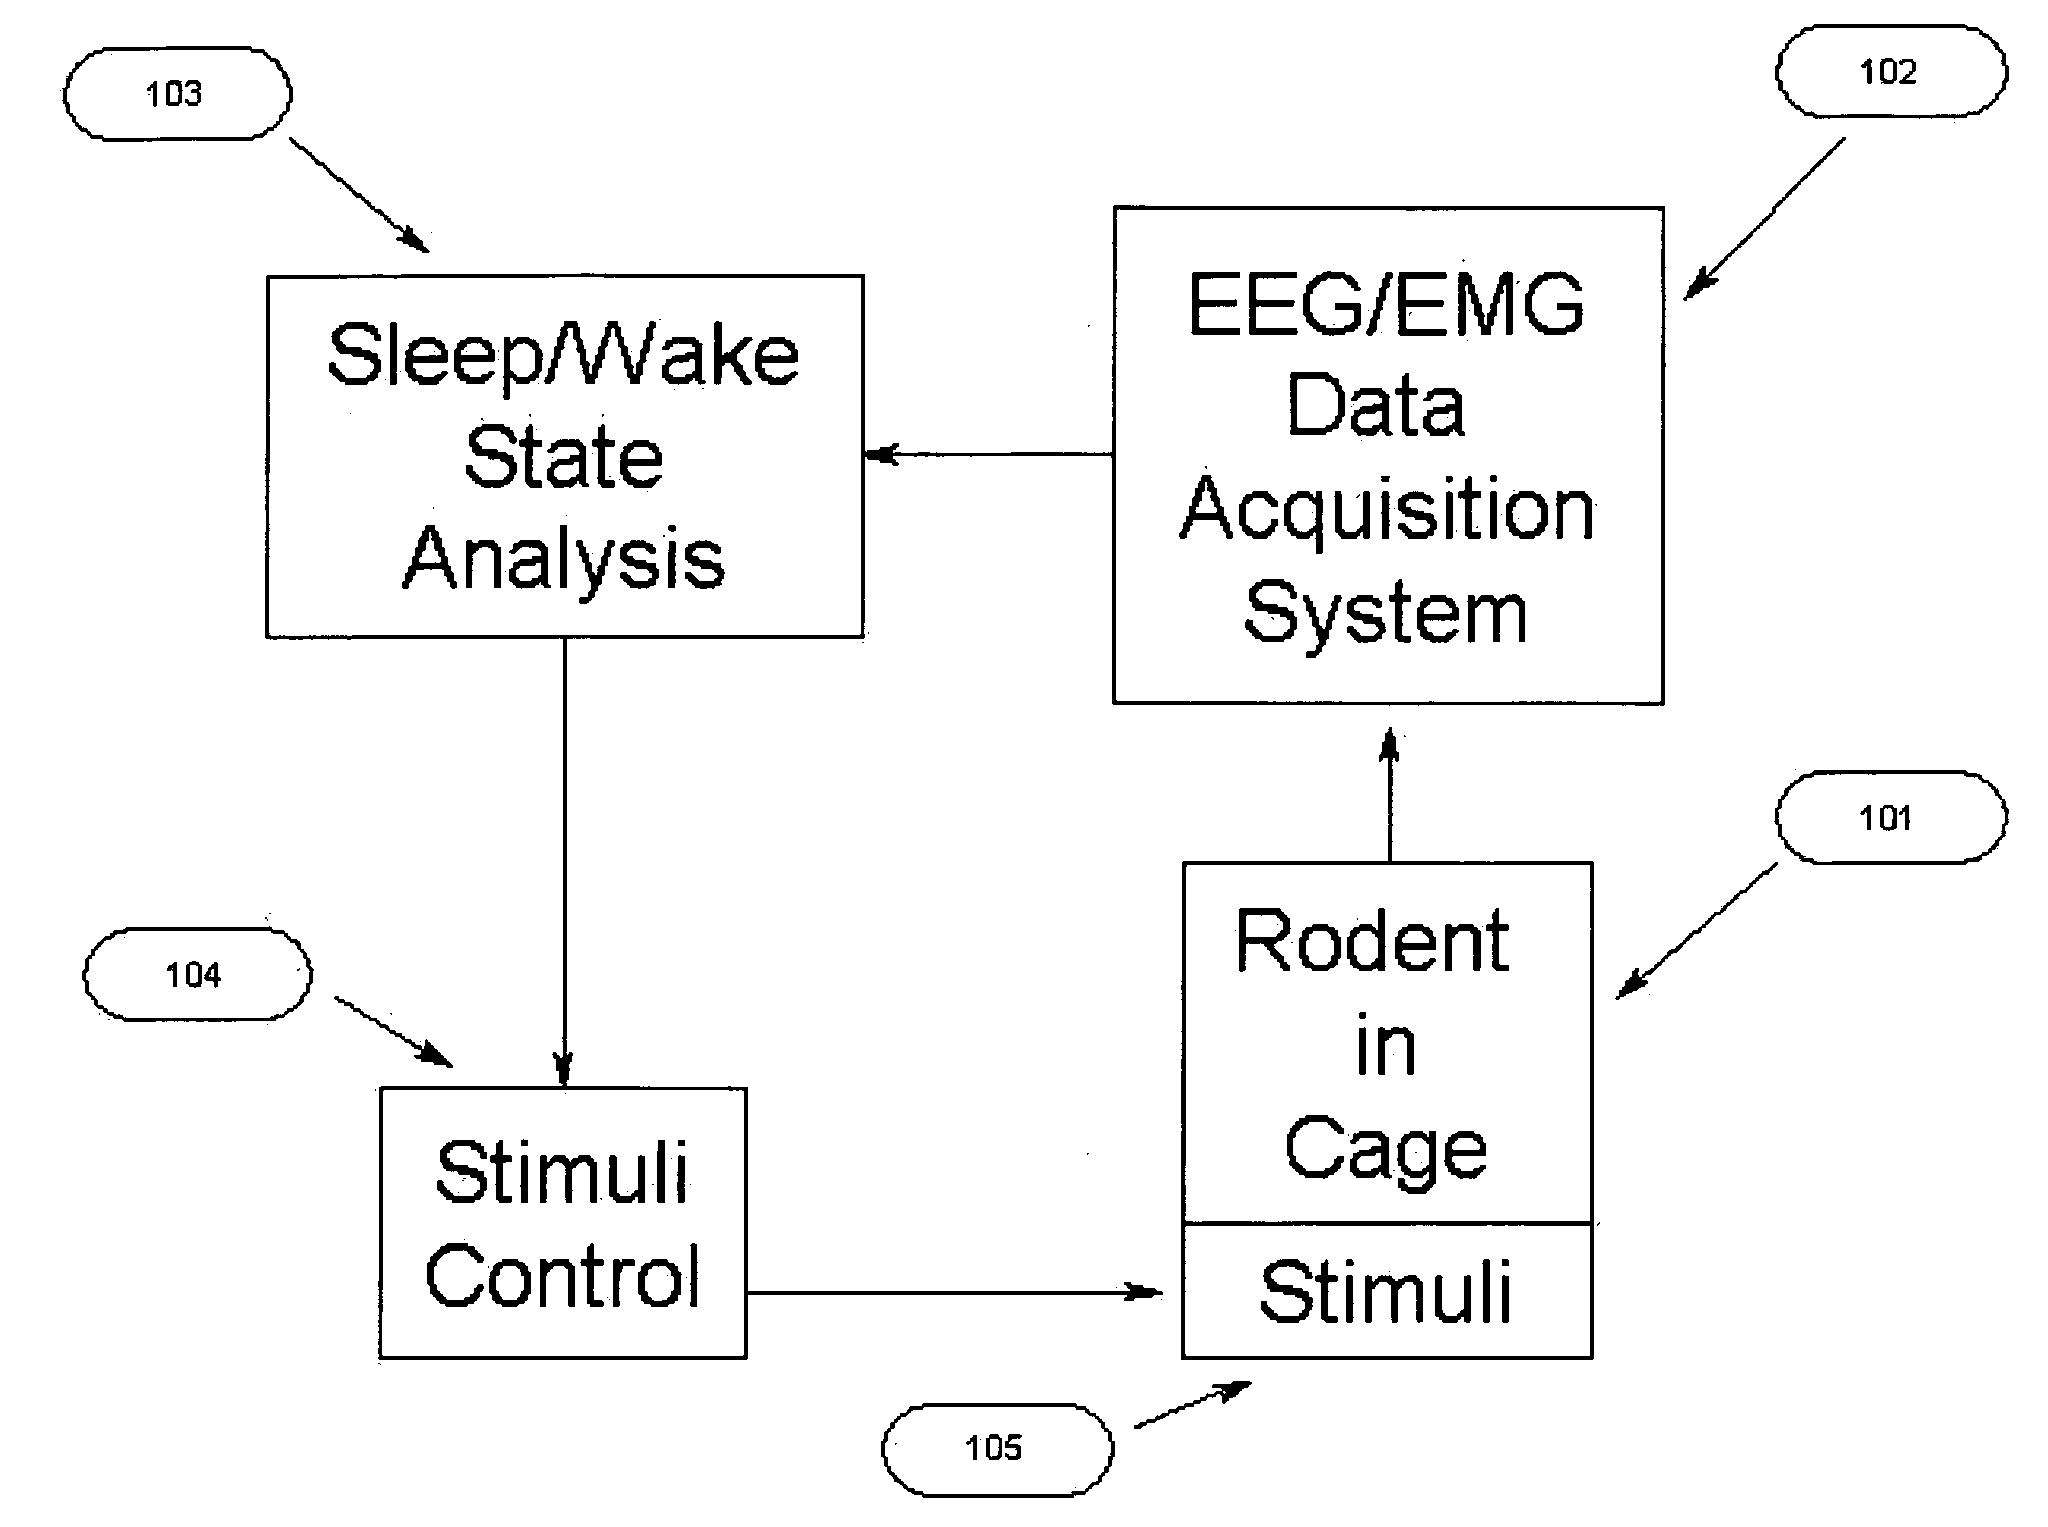 Apparatus and method for automatically inducing sleep deprivation in rodents